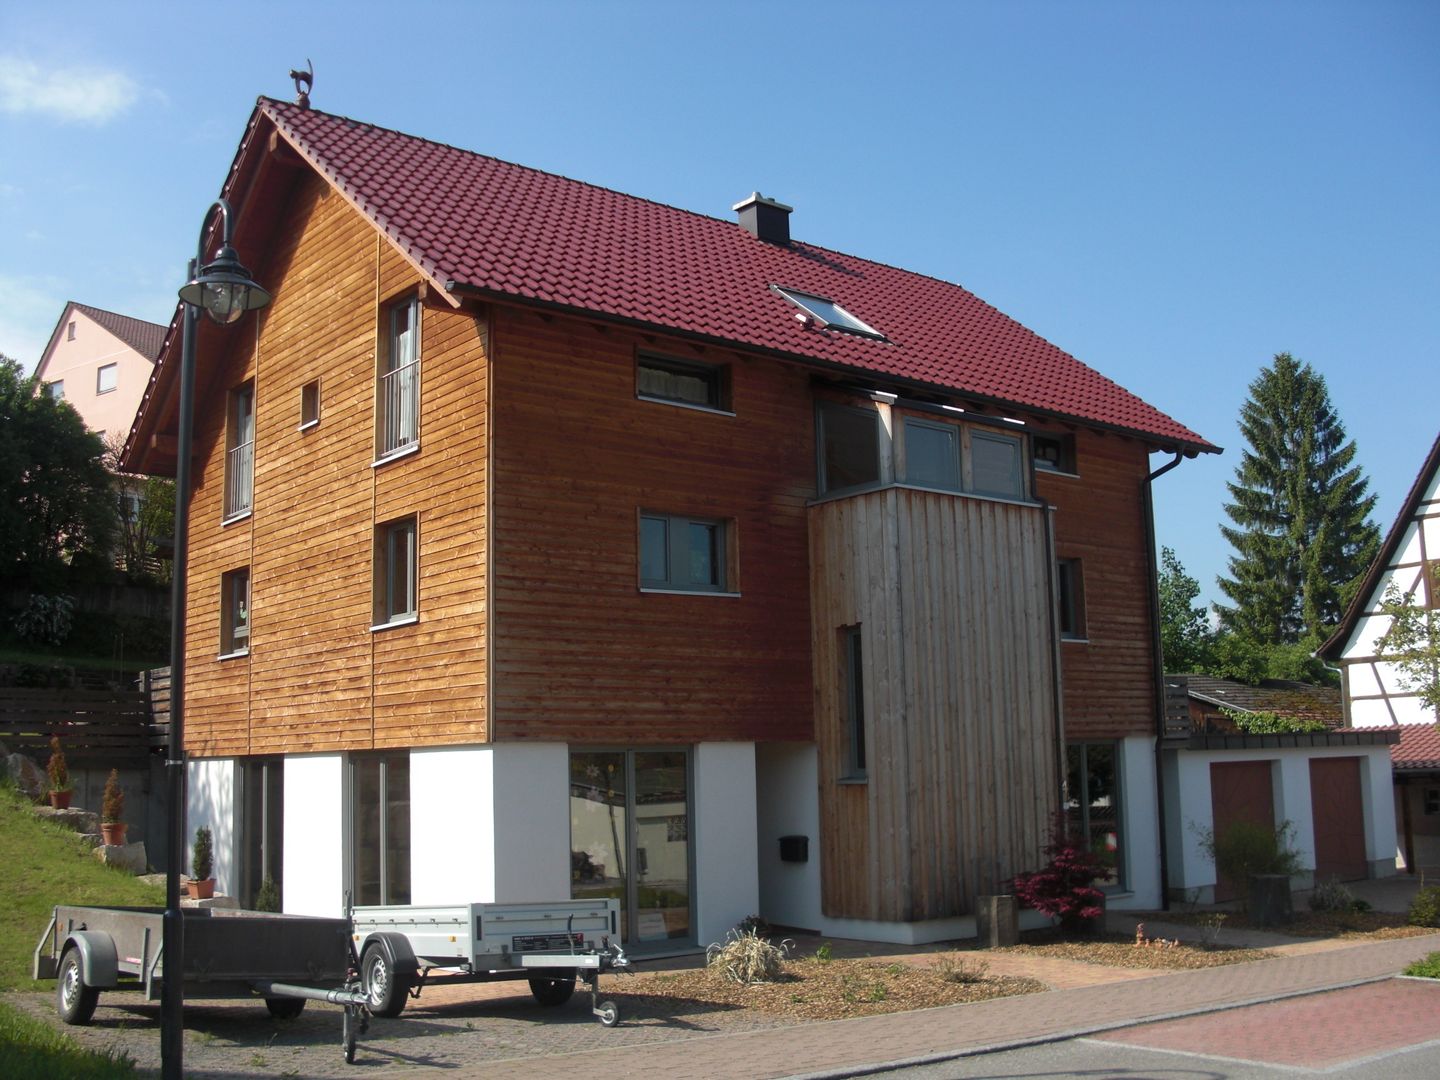 Haus S, Laifer Holzsysteme Laifer Holzsysteme Classic style houses